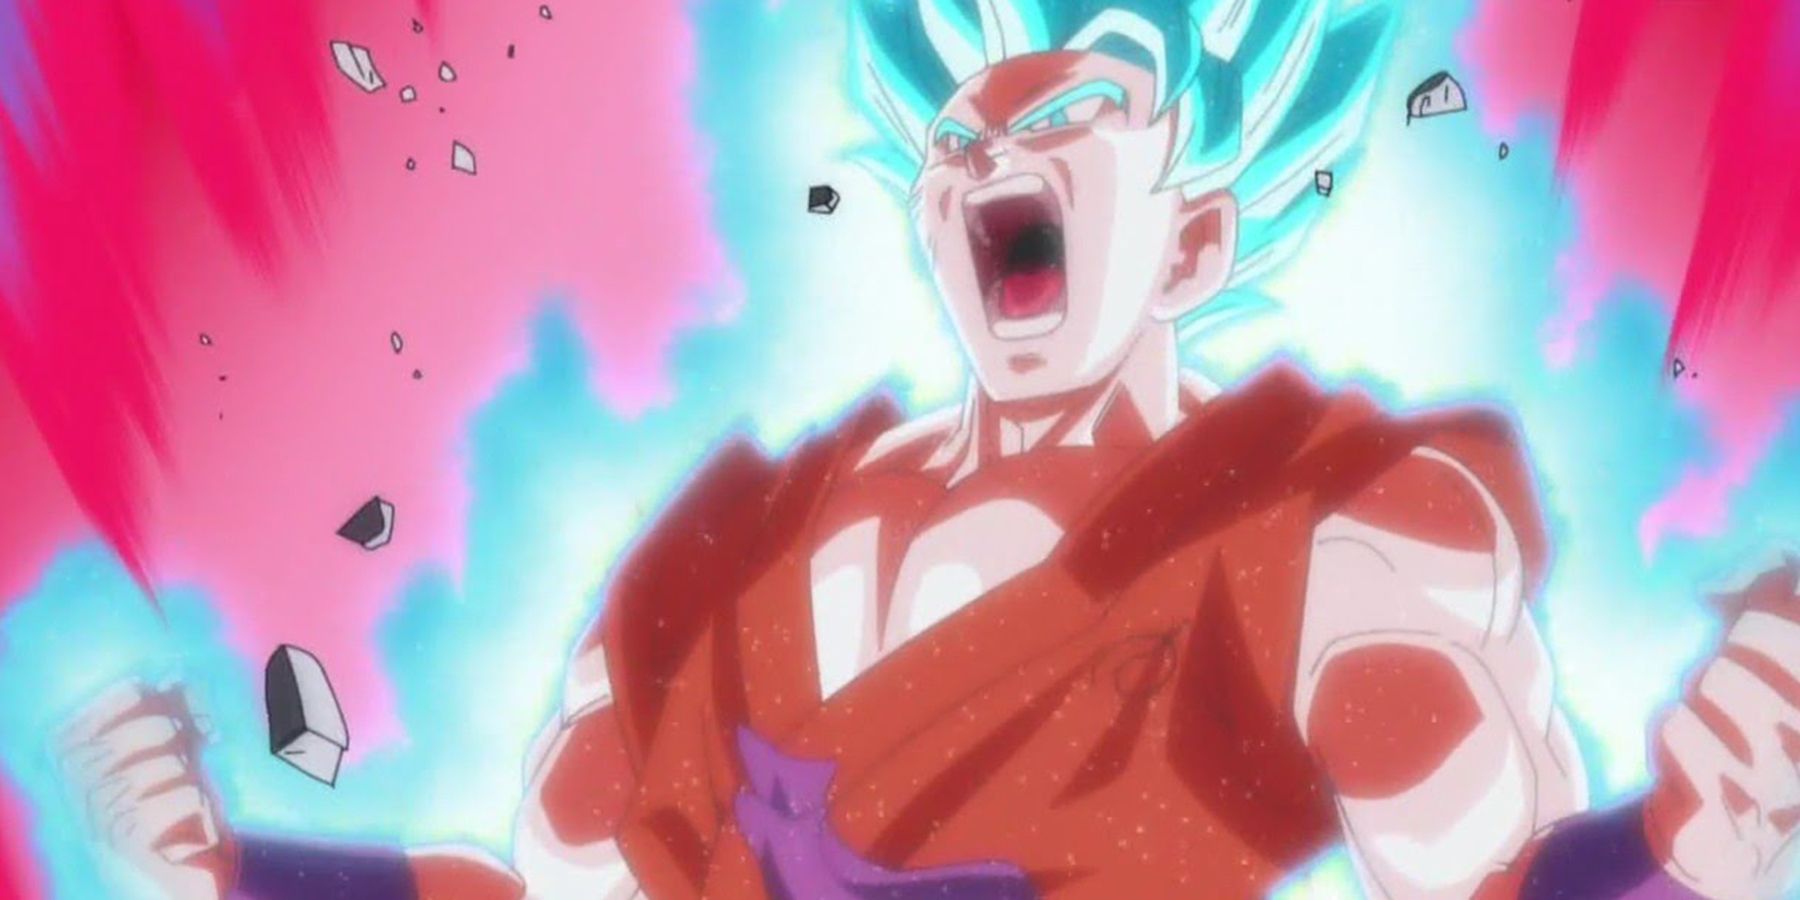 The 10 Worst Episodes Of Dragon Ball Super According to IMDb